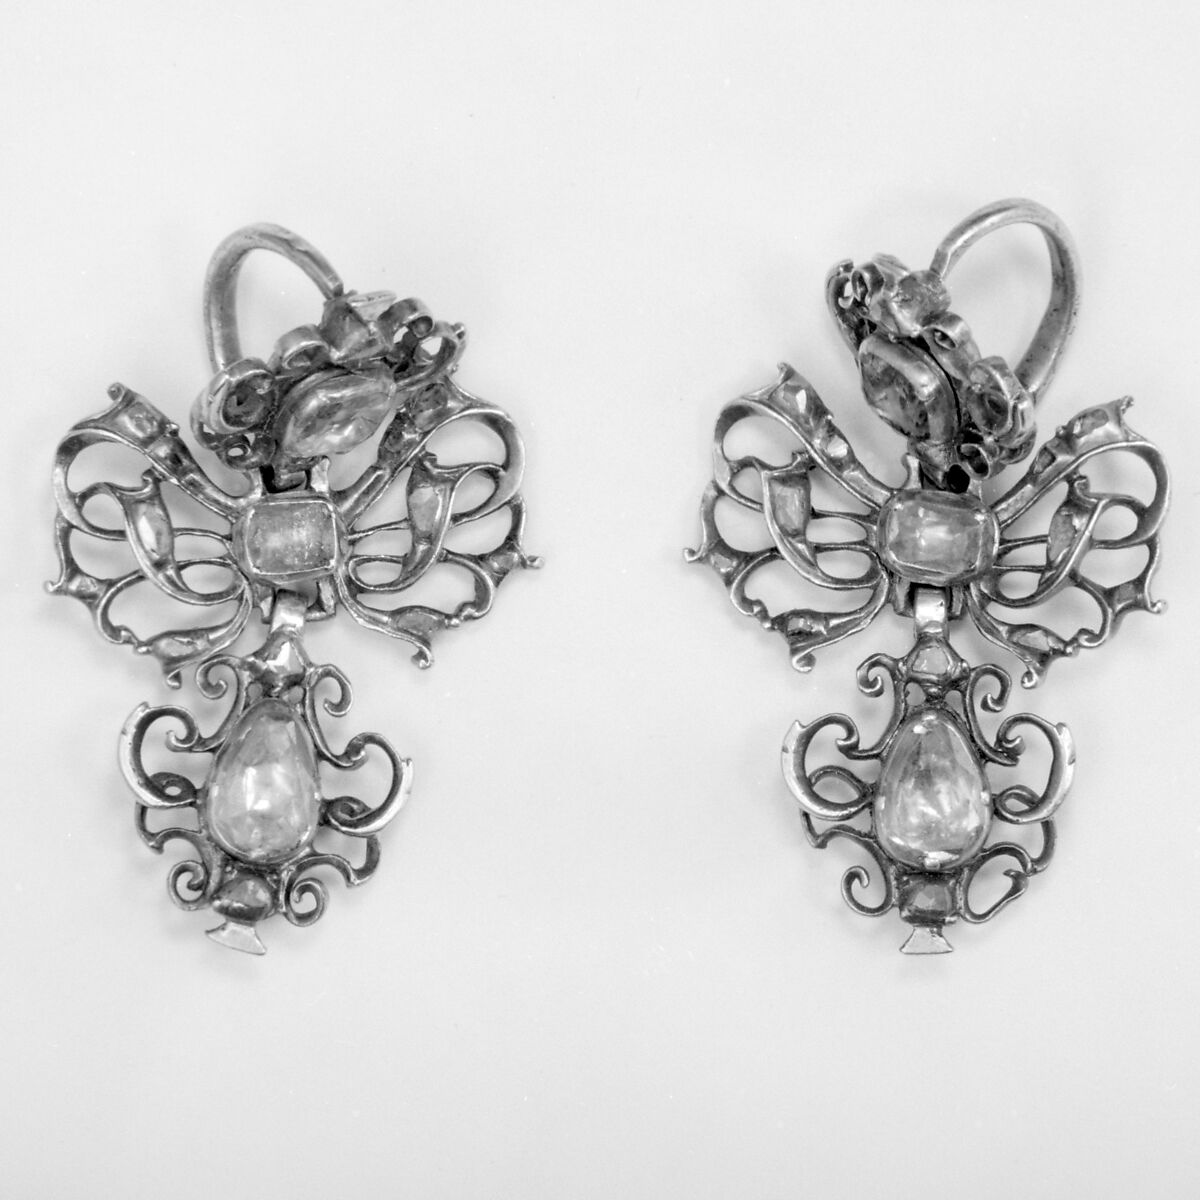 Pair of earrings, Silver, jewels, Continental 